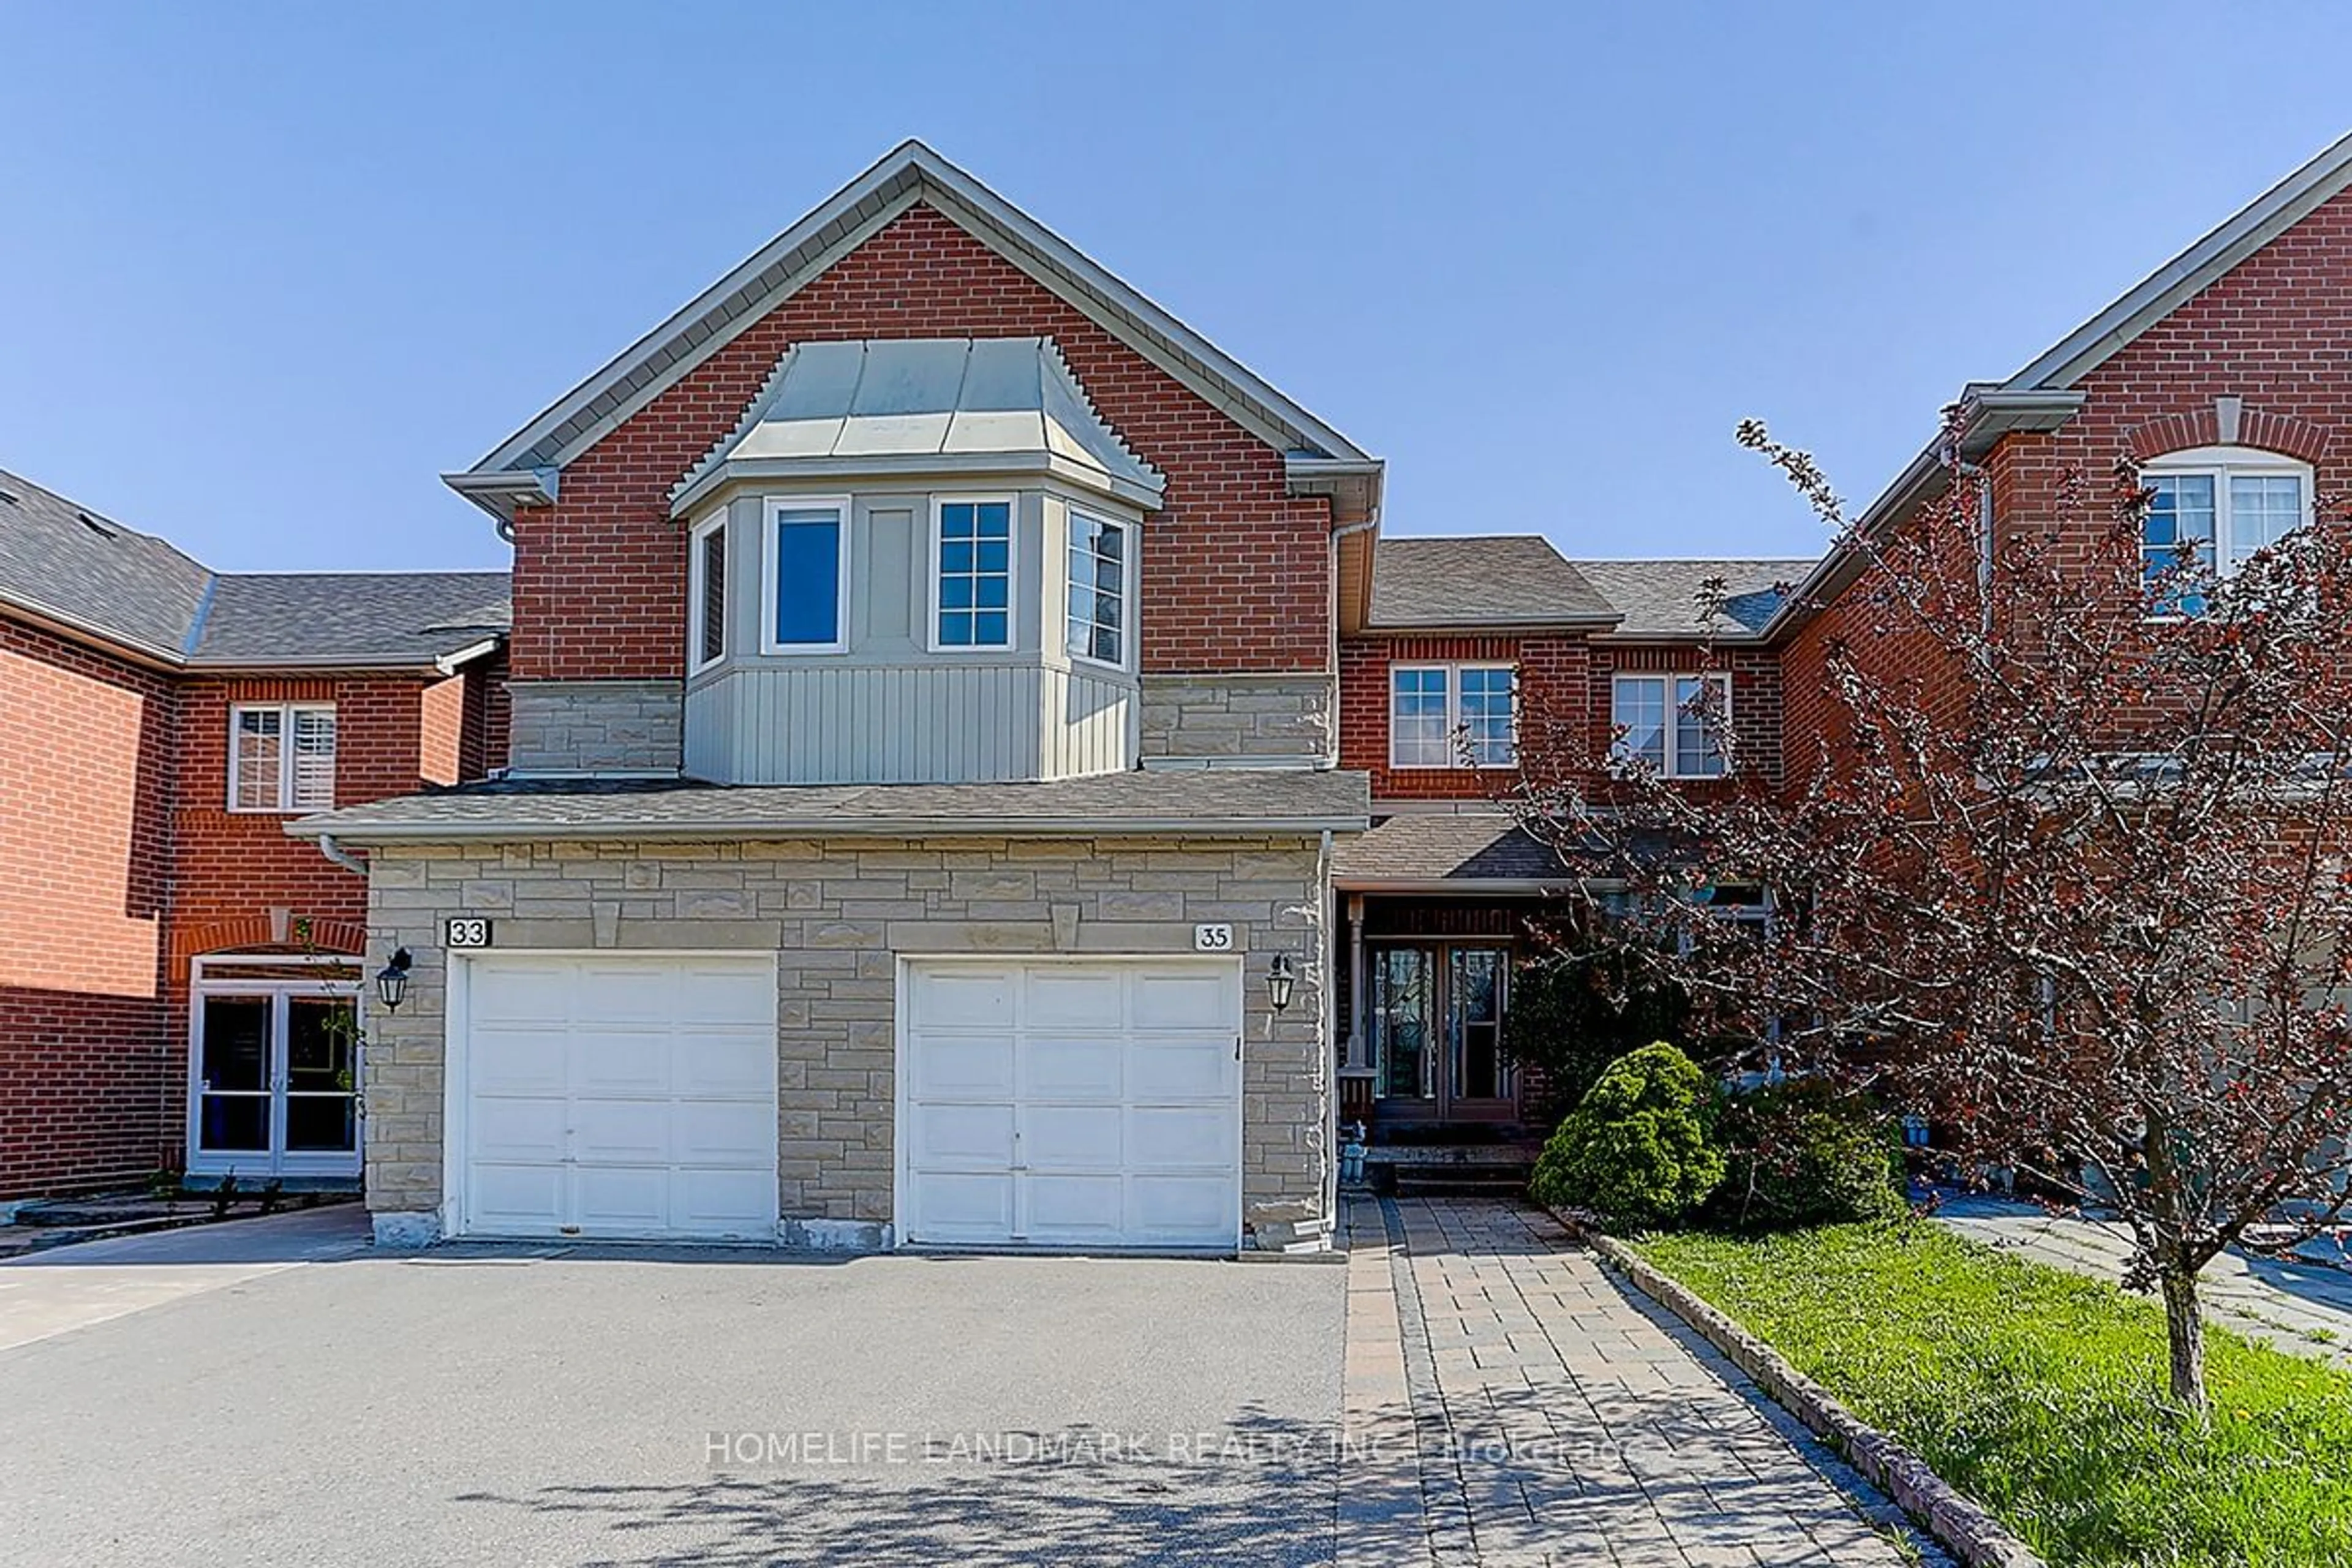 Home with brick exterior material for 35 Nottingham Dr, Richmond Hill Ontario L4S 1Z6